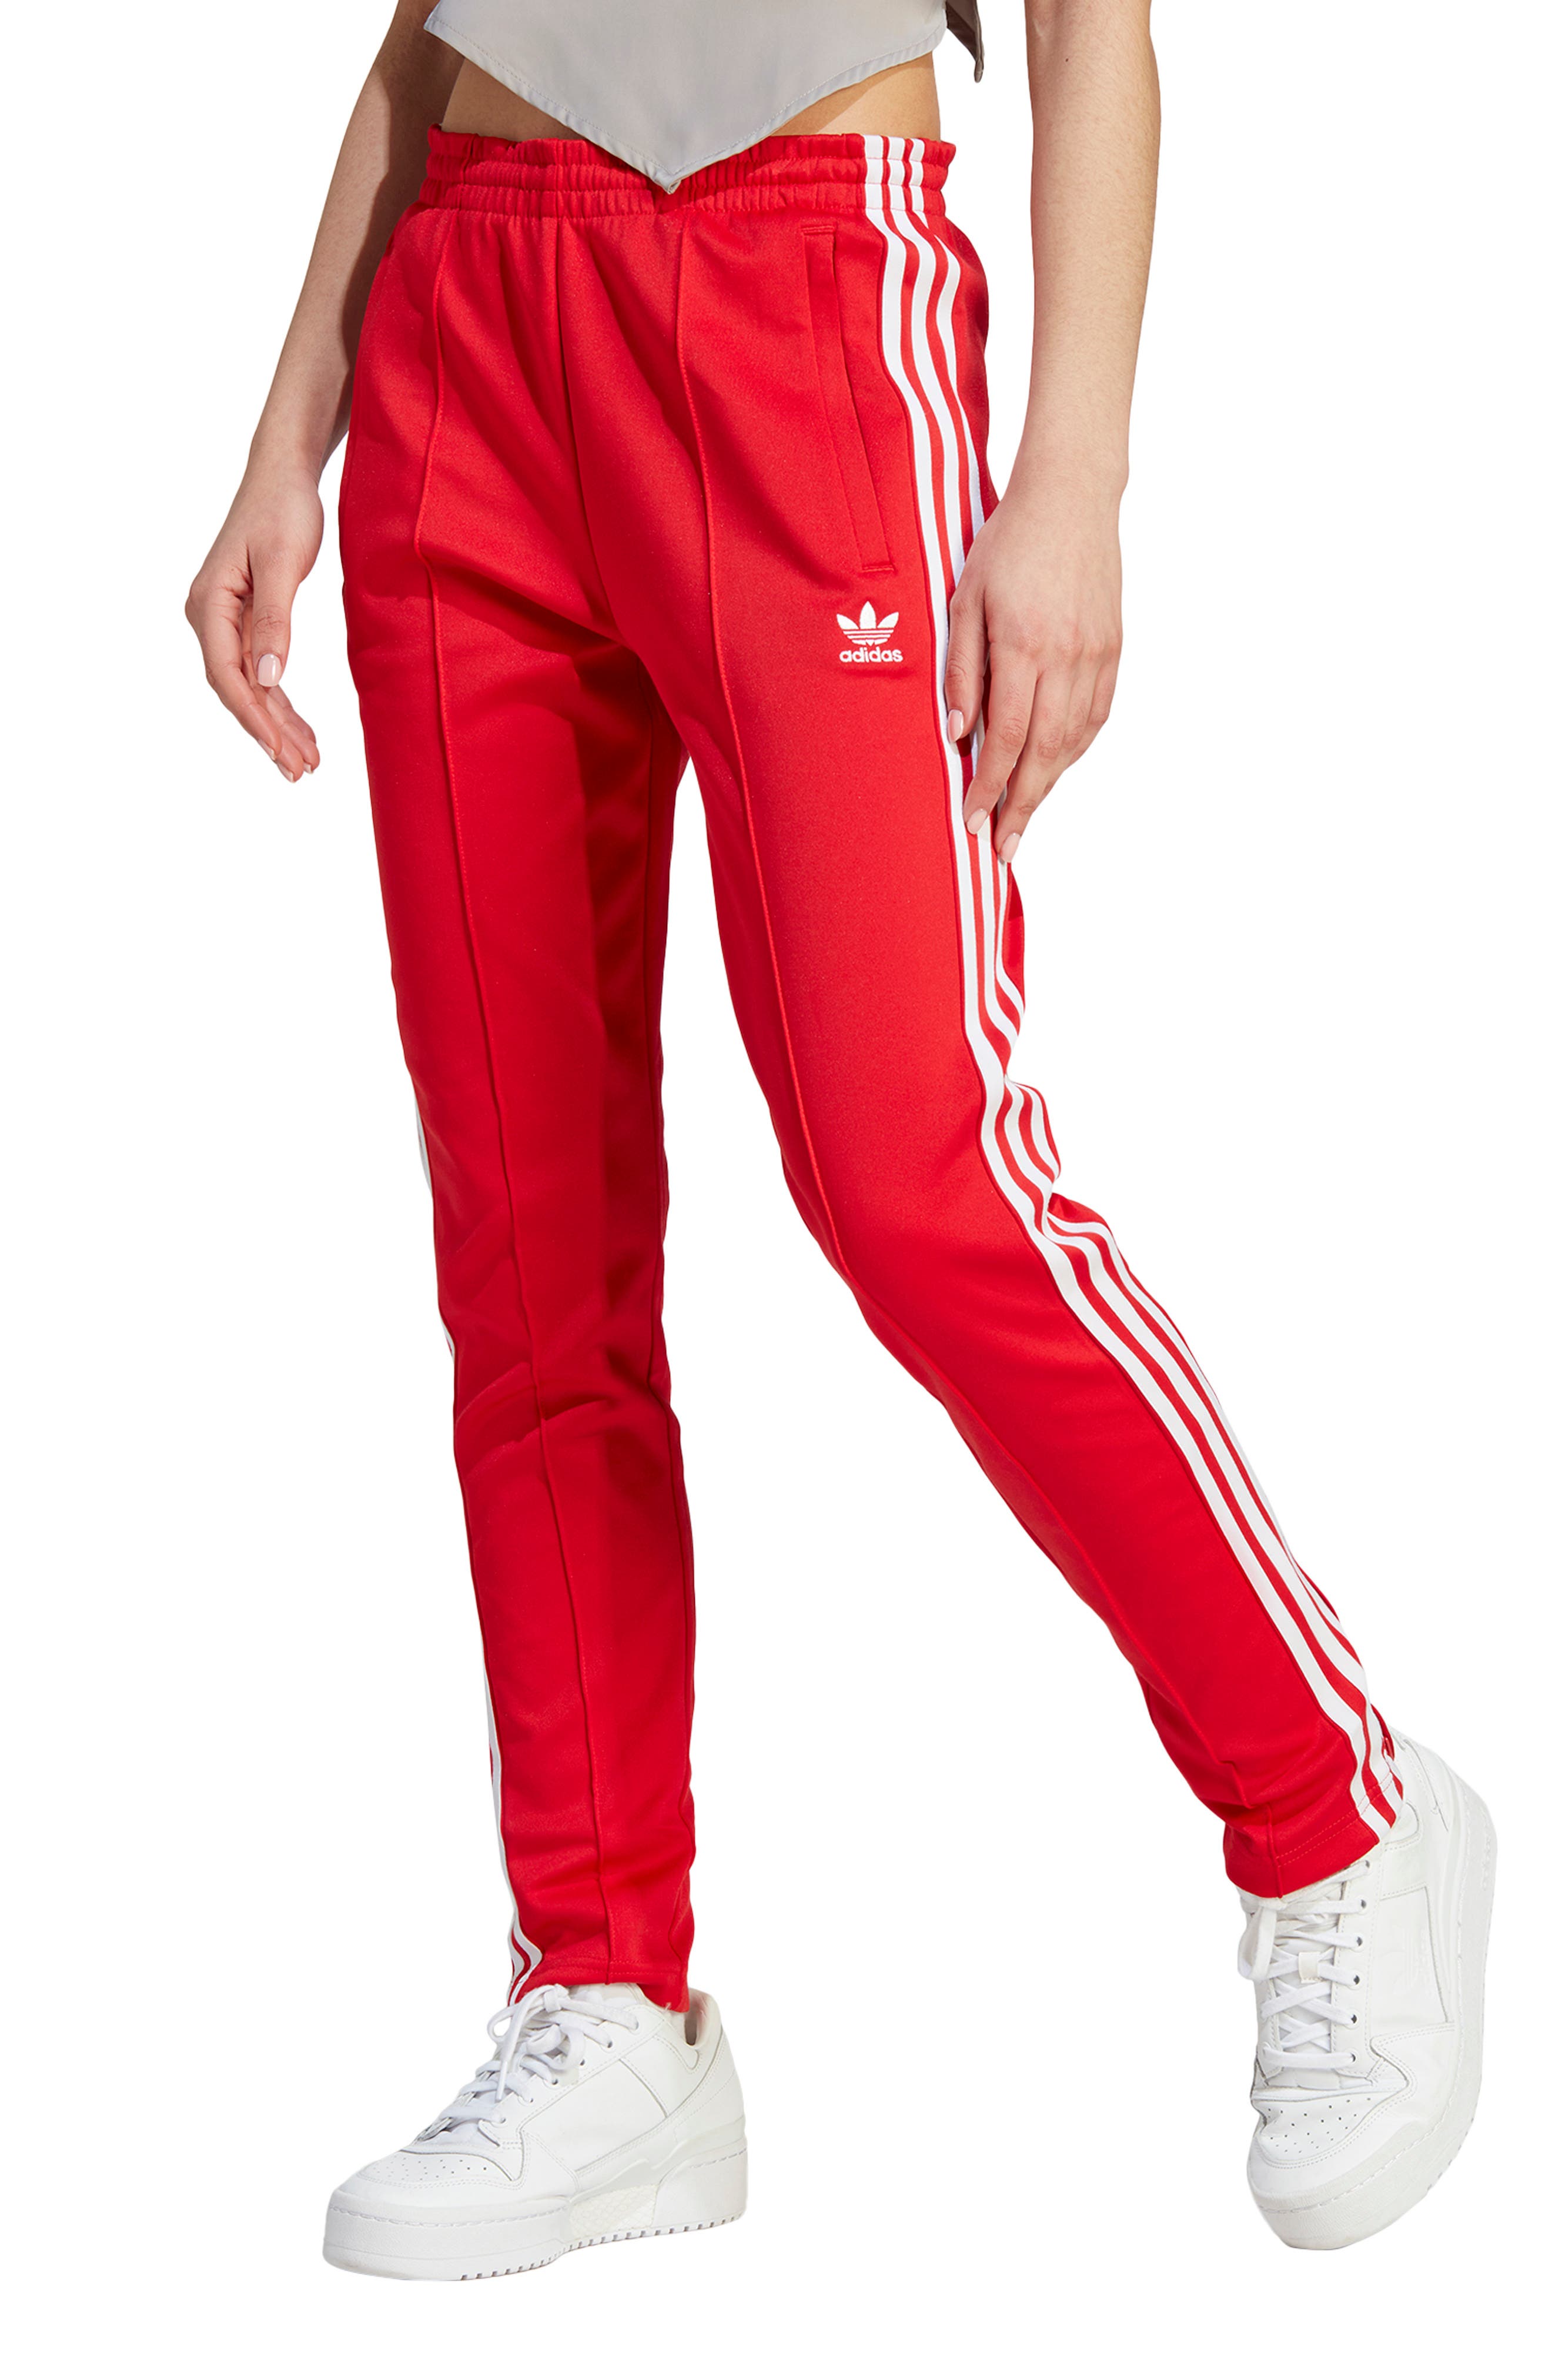 adidas Big Trifoil Sweat Pants Red/White